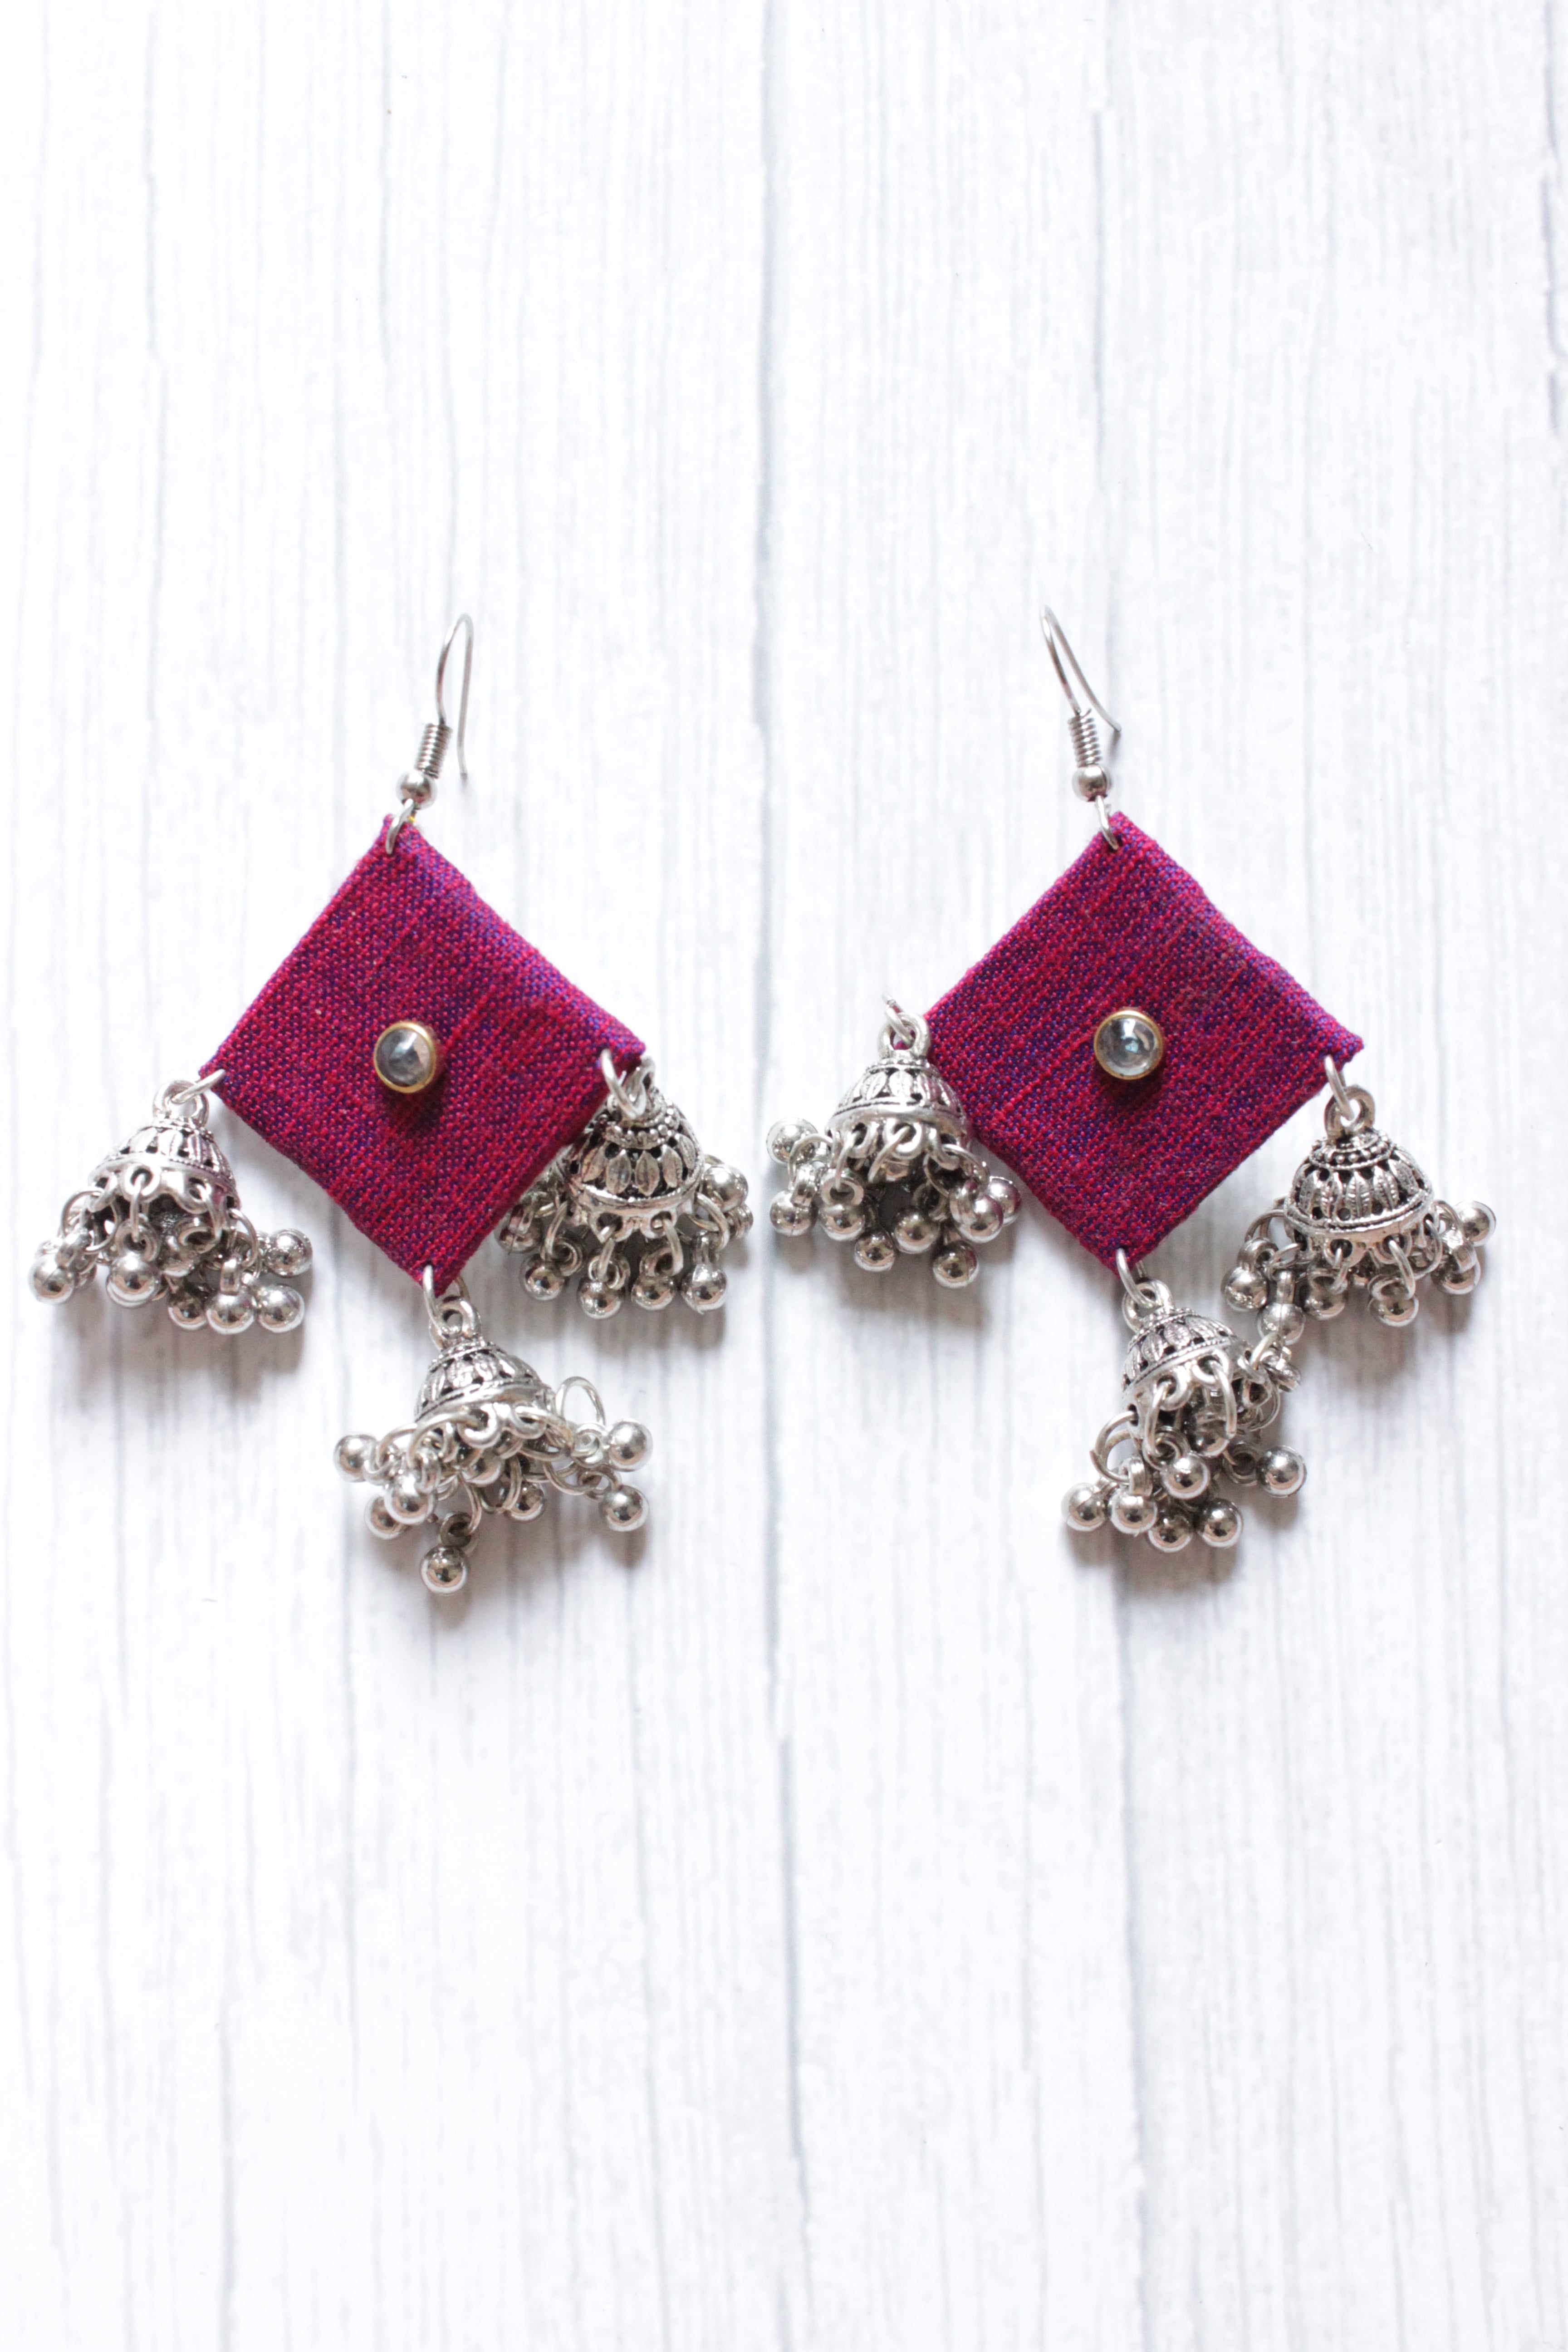 Handcrafted Fabric Square 3 Jhumka Earrings